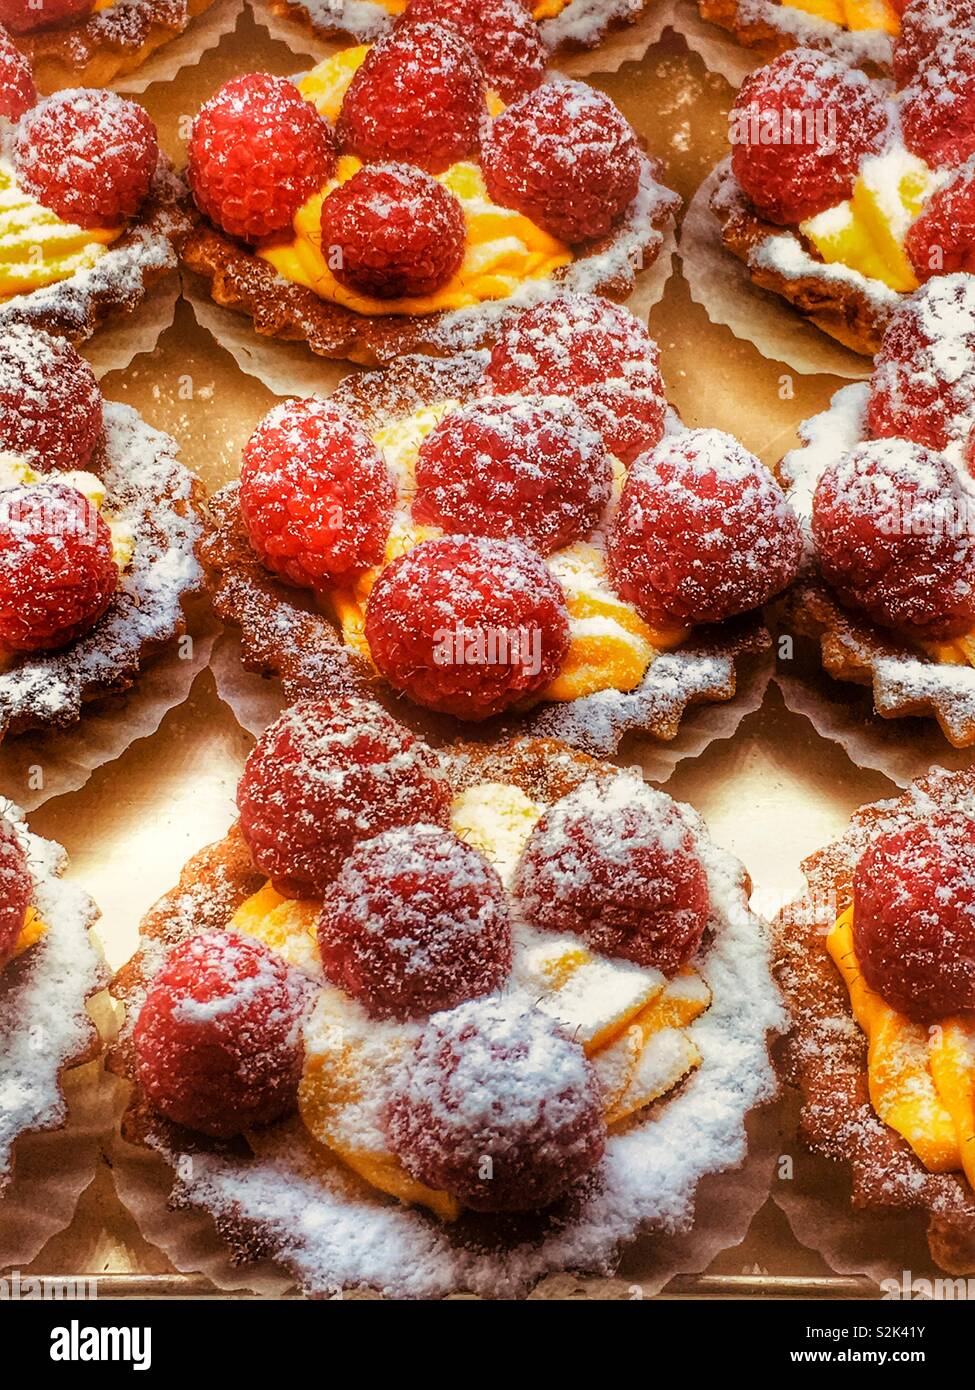 Fresh delicious and mouth watering professionally baked raspberry tarts with cream and powdered sugar. Stock Photo